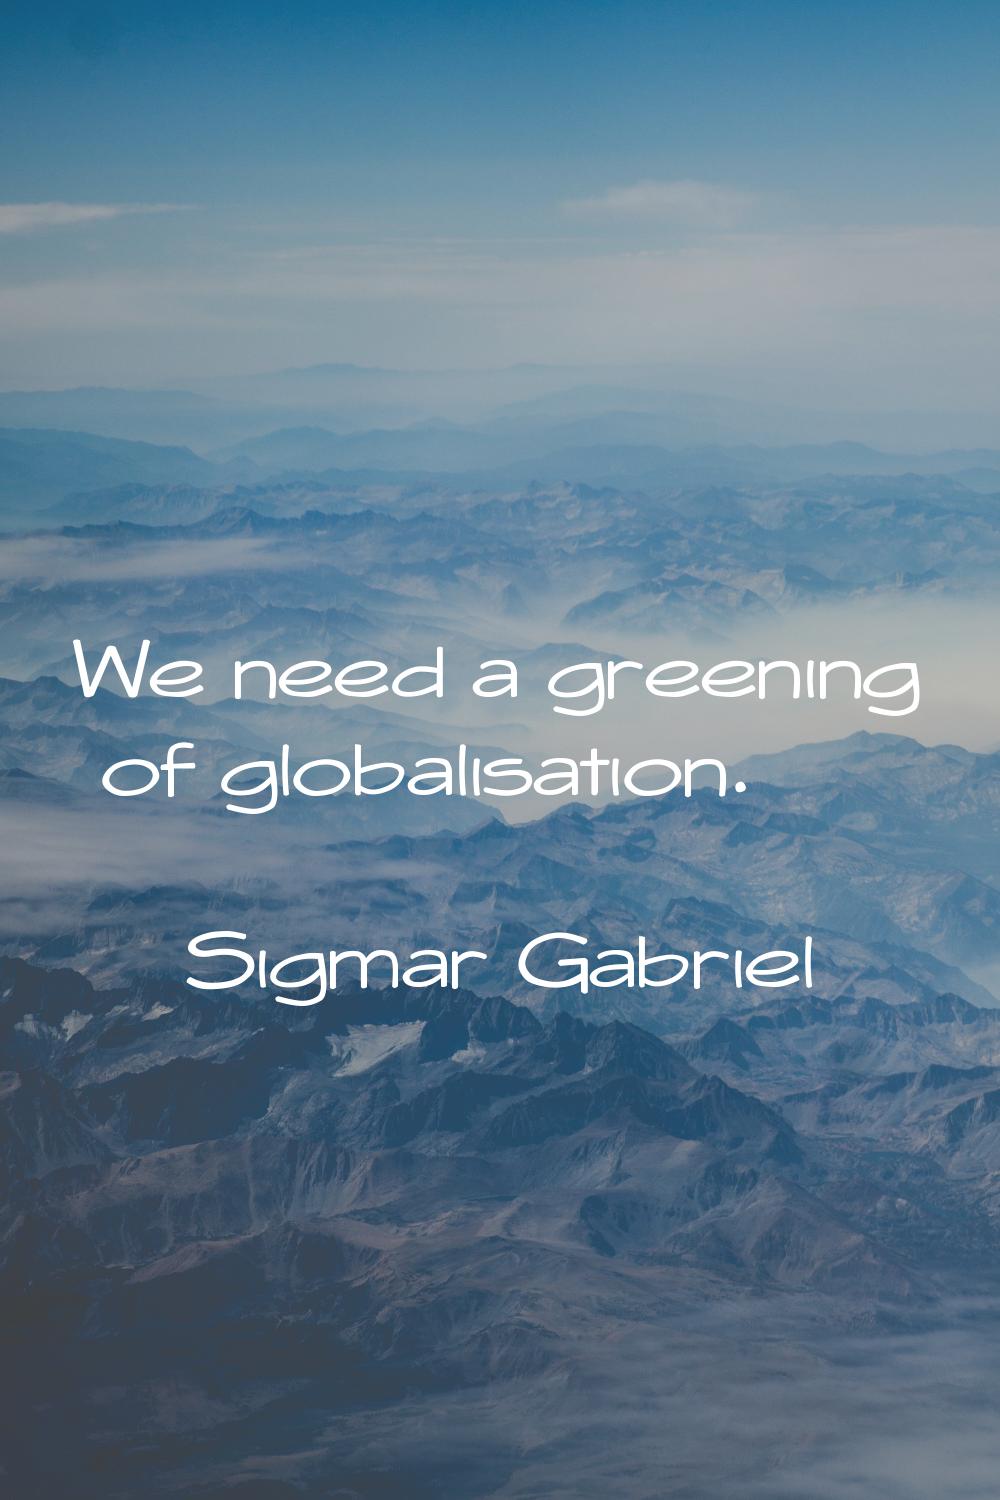 We need a greening of globalisation.